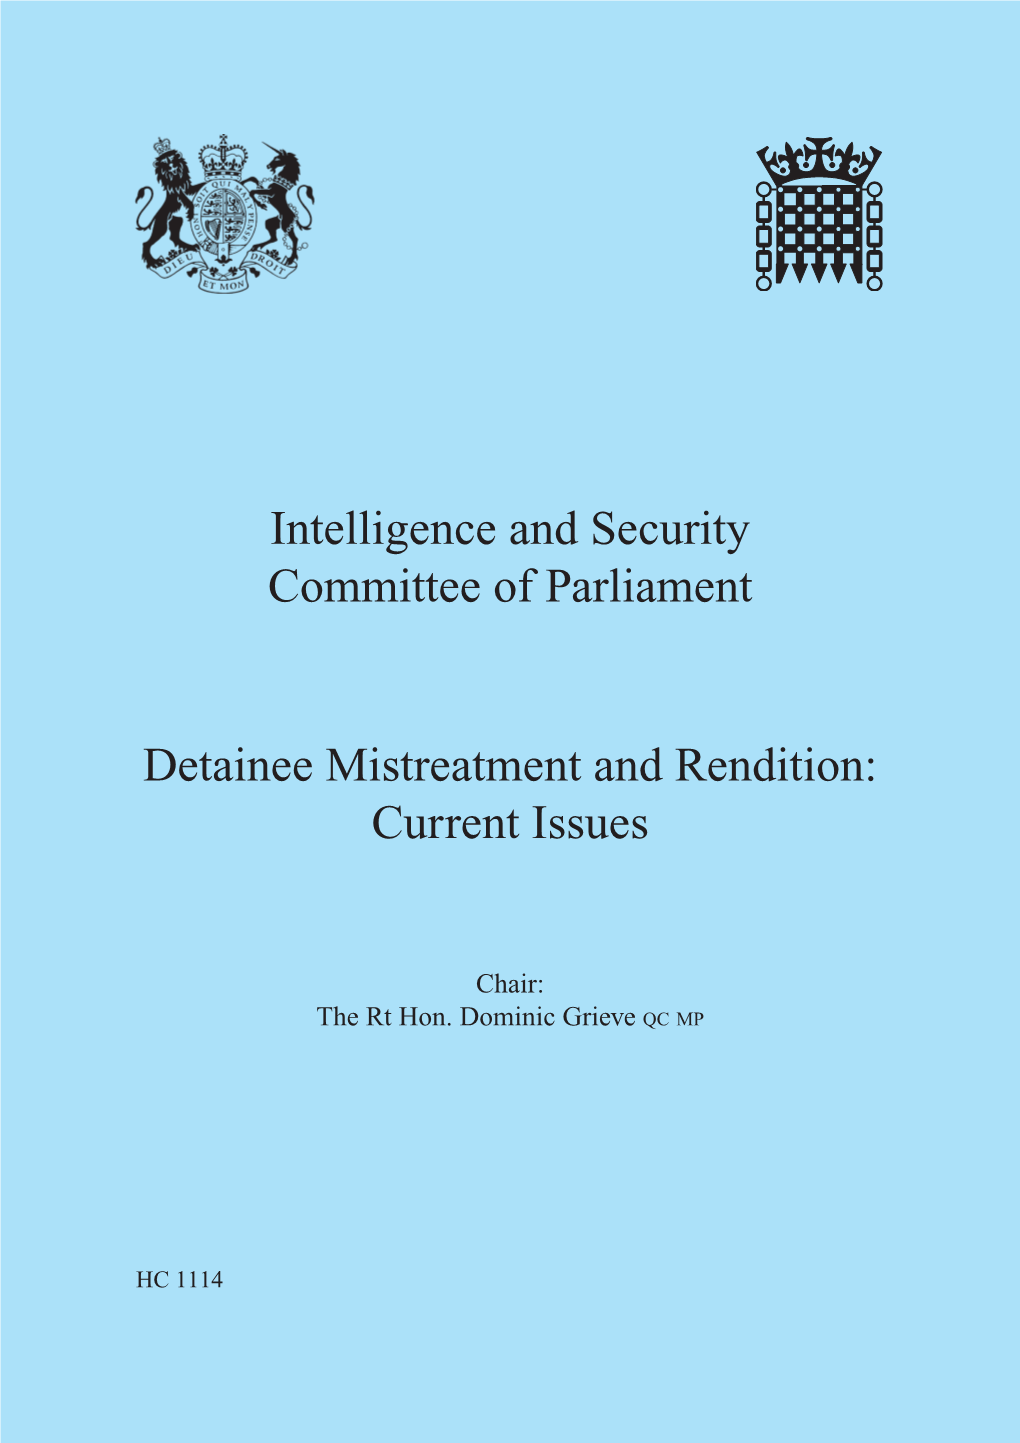 Detainee Mistreatment and Rendition: Current Issues the Intelligence and Security Committee of Parliament – Detainee Mistreatment and Rendition: Current